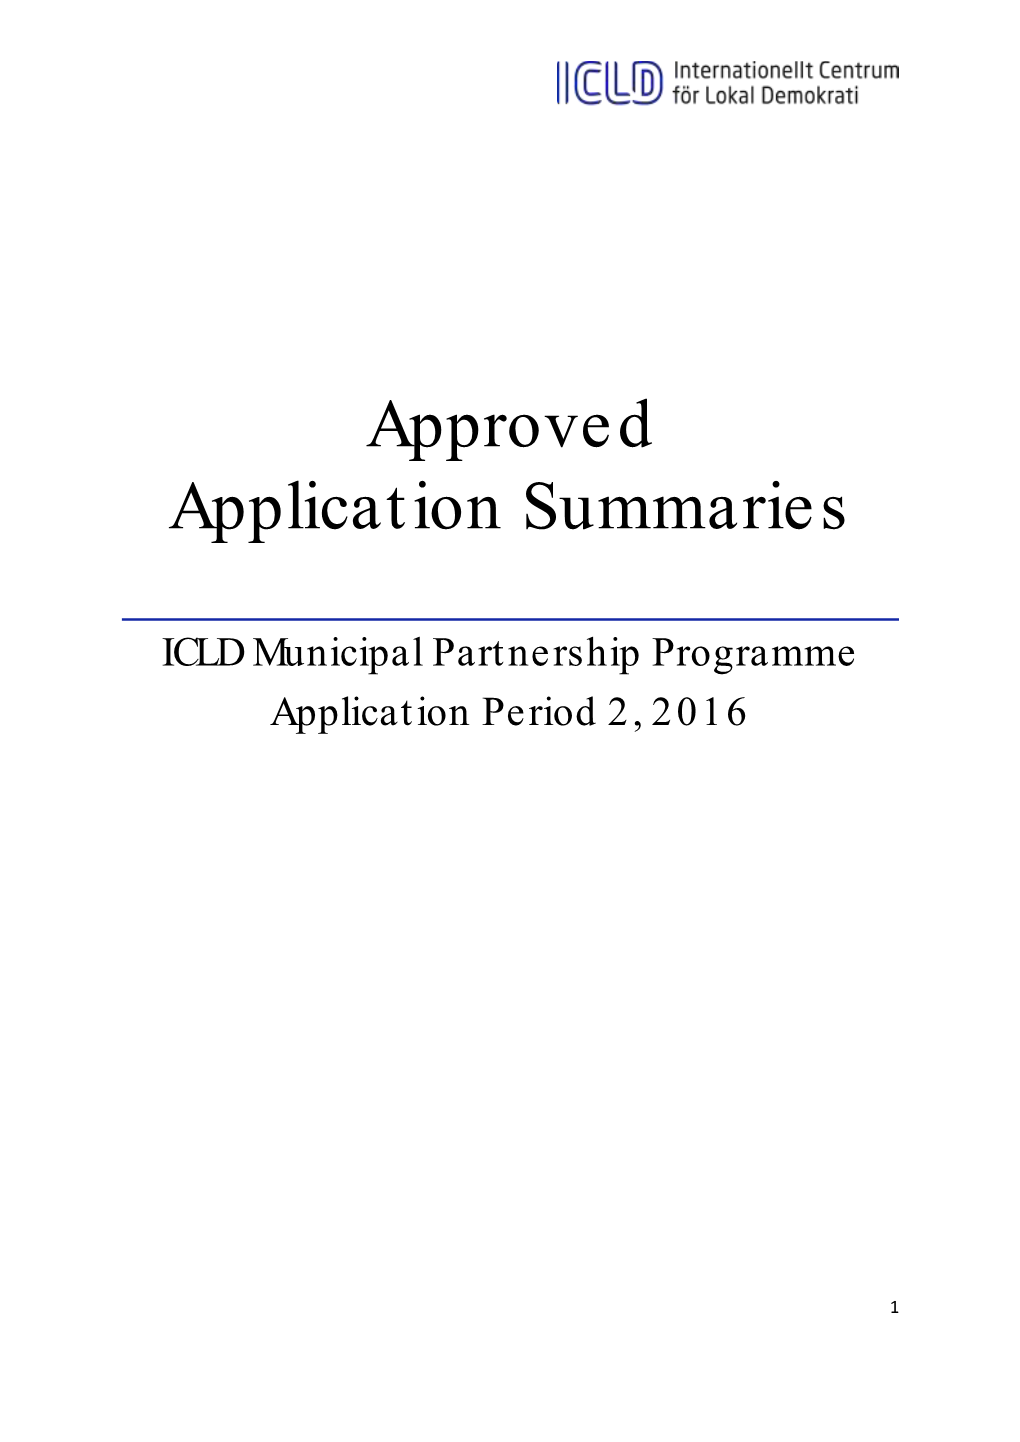 Approved Application Summaries